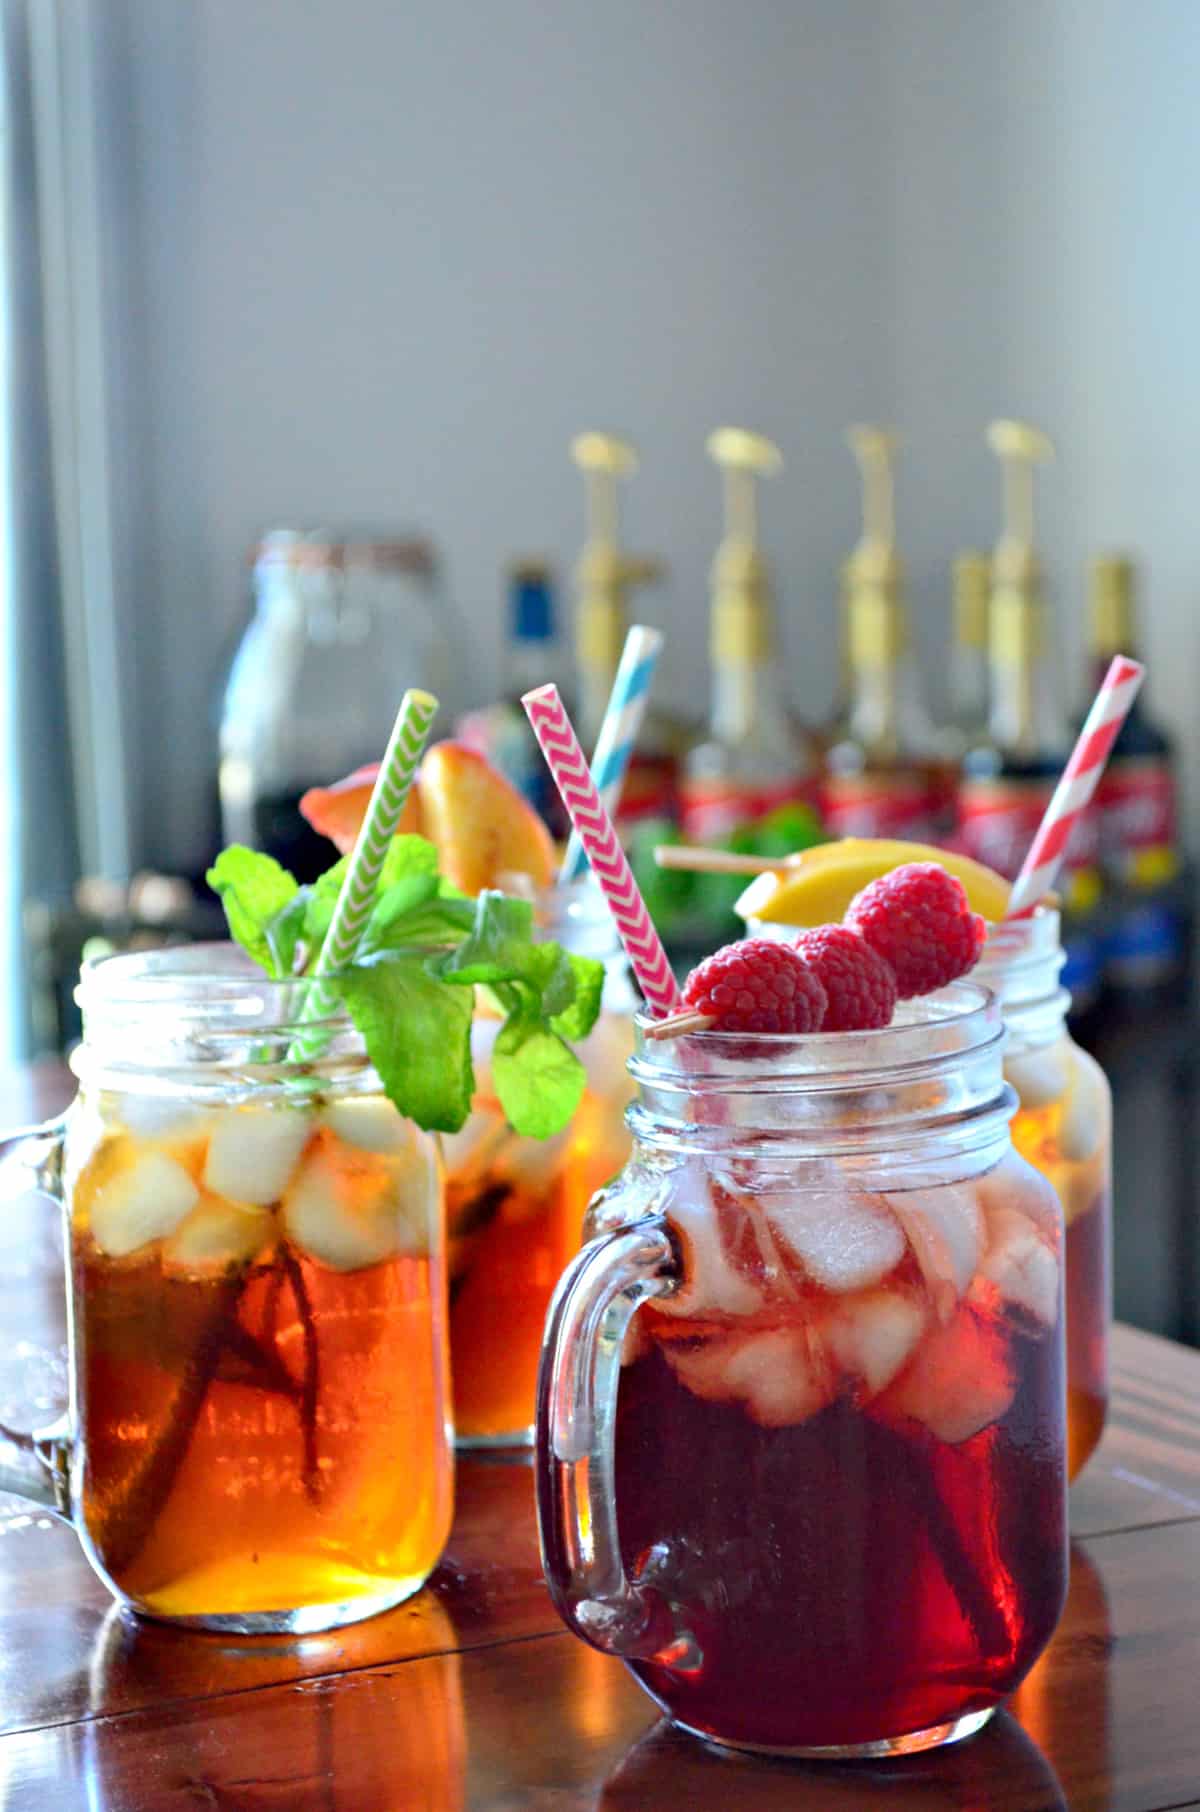 4 glass jars of iced tea, each garnished with a different item like peaches, raspberries, and mint.